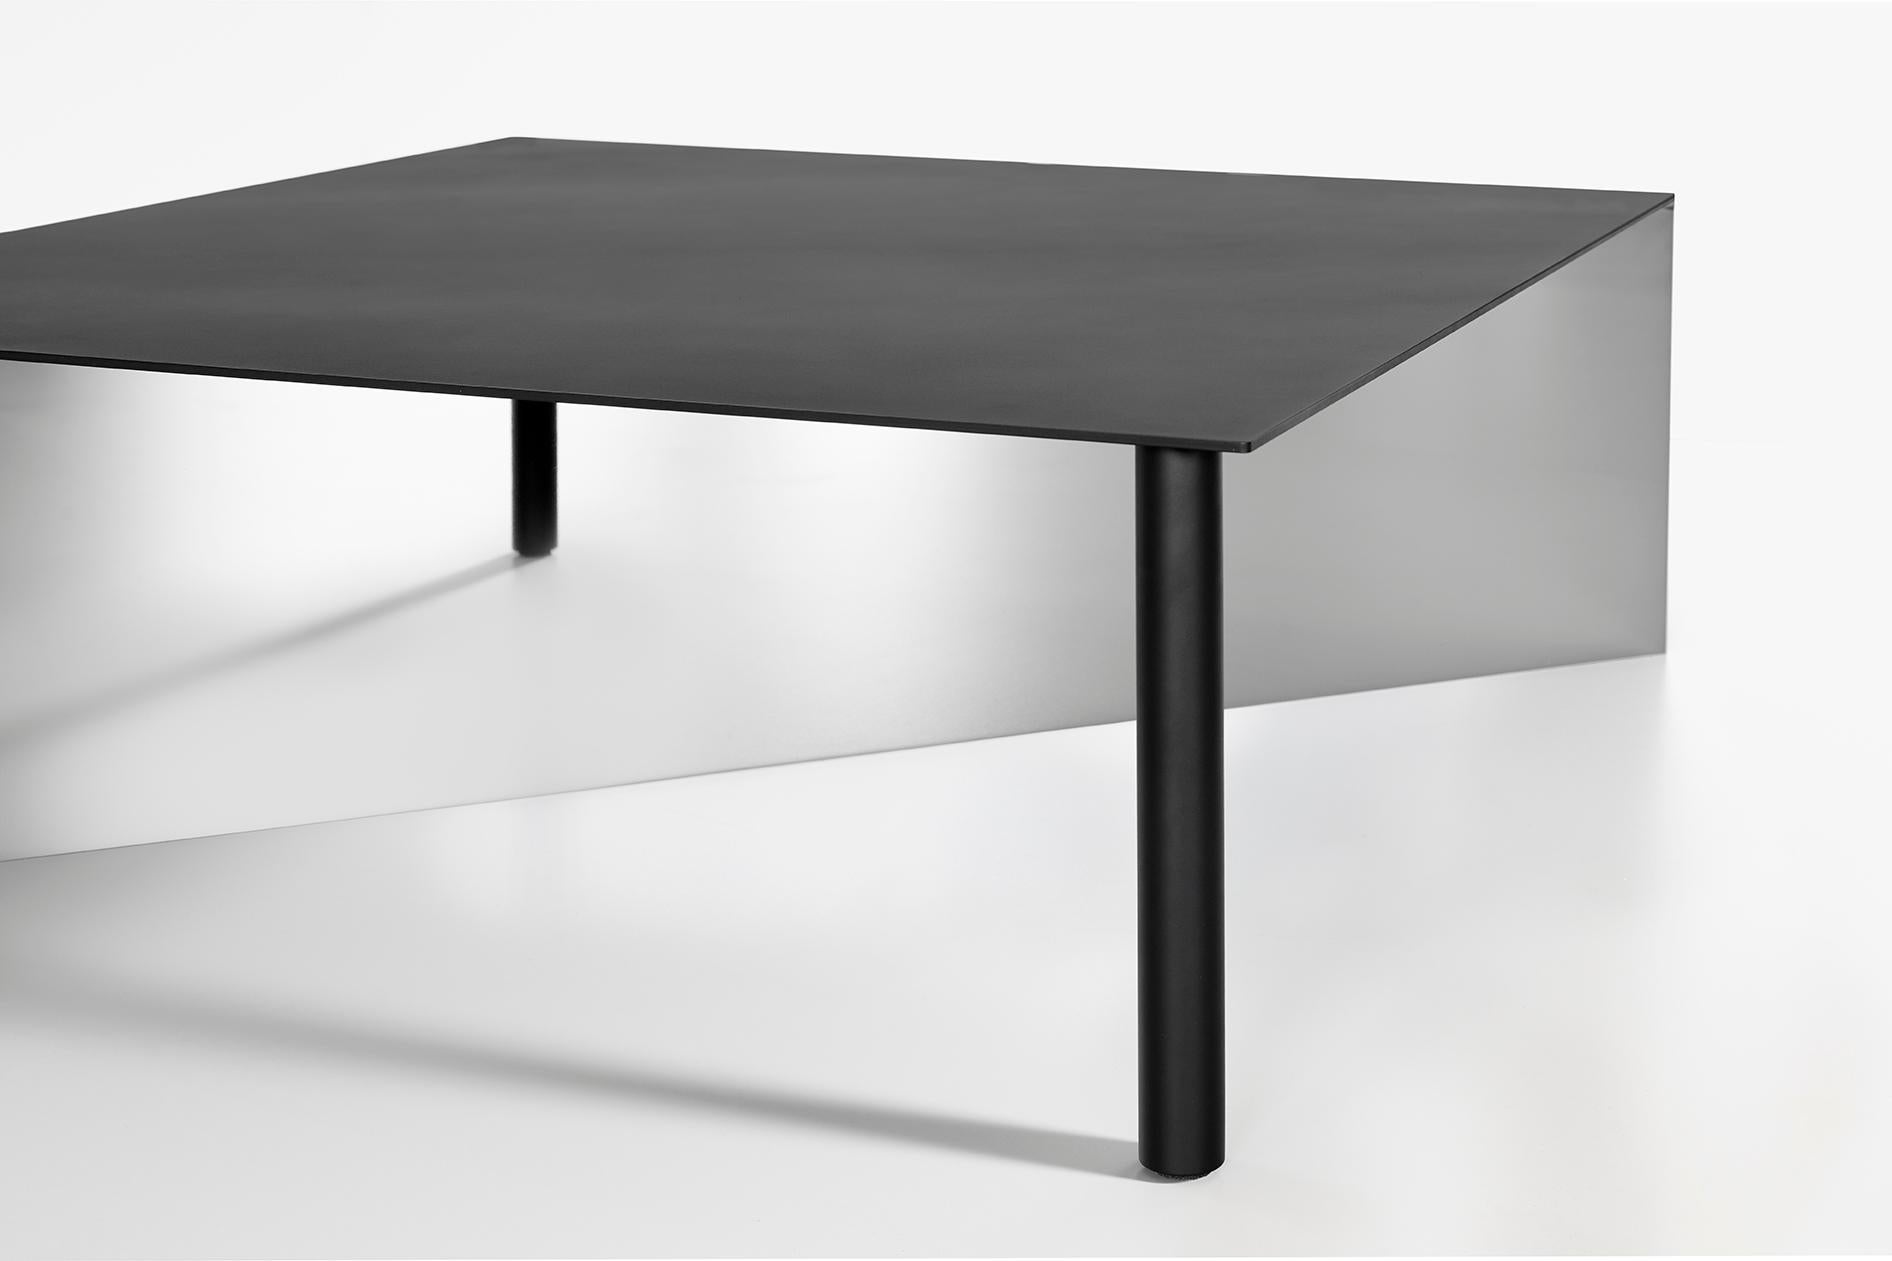 Piatto is a family of tables made from solid steel plate; despite the material, however, the objects look light. The range includes small side tables, large coffee tables, and tall display tables. Piatto tables are perhaps familiar - the angles,